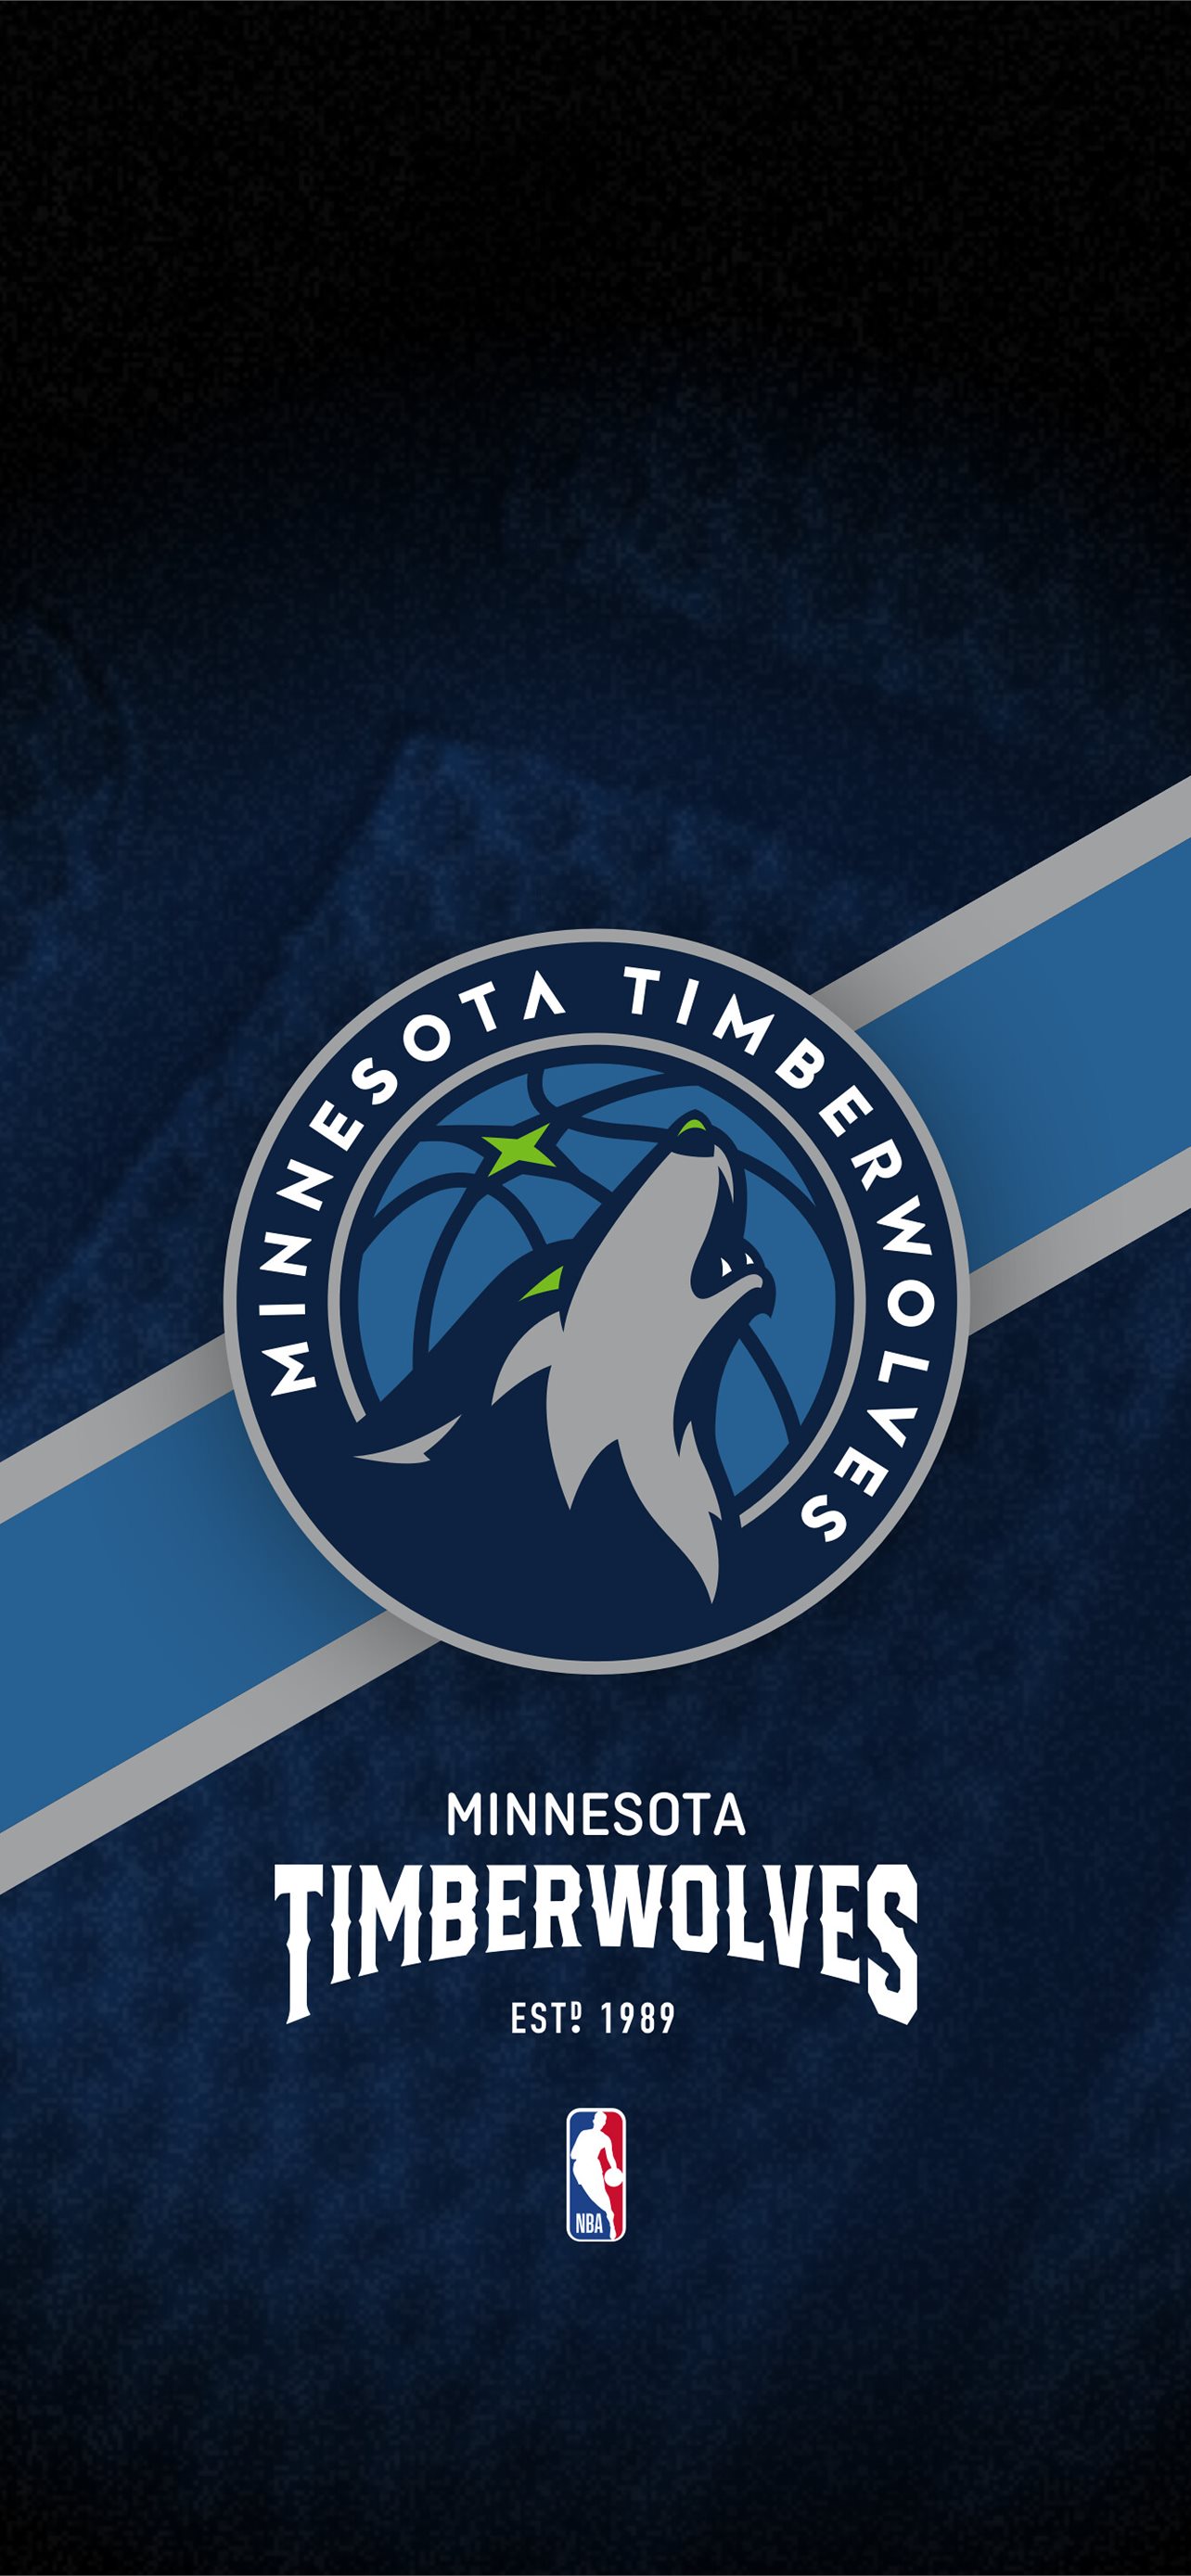 Free download Minnesota Timberwolves Wallpaper For Mac Backgrounds 2019  1920x1080 for your Desktop Mobile  Tablet  Explore 58 Minnesota  Timberwolves Wallpapers  Minnesota Vikings Wallpapers Minnesota Twins  Wallpaper Minnesota Vikings Backgrounds